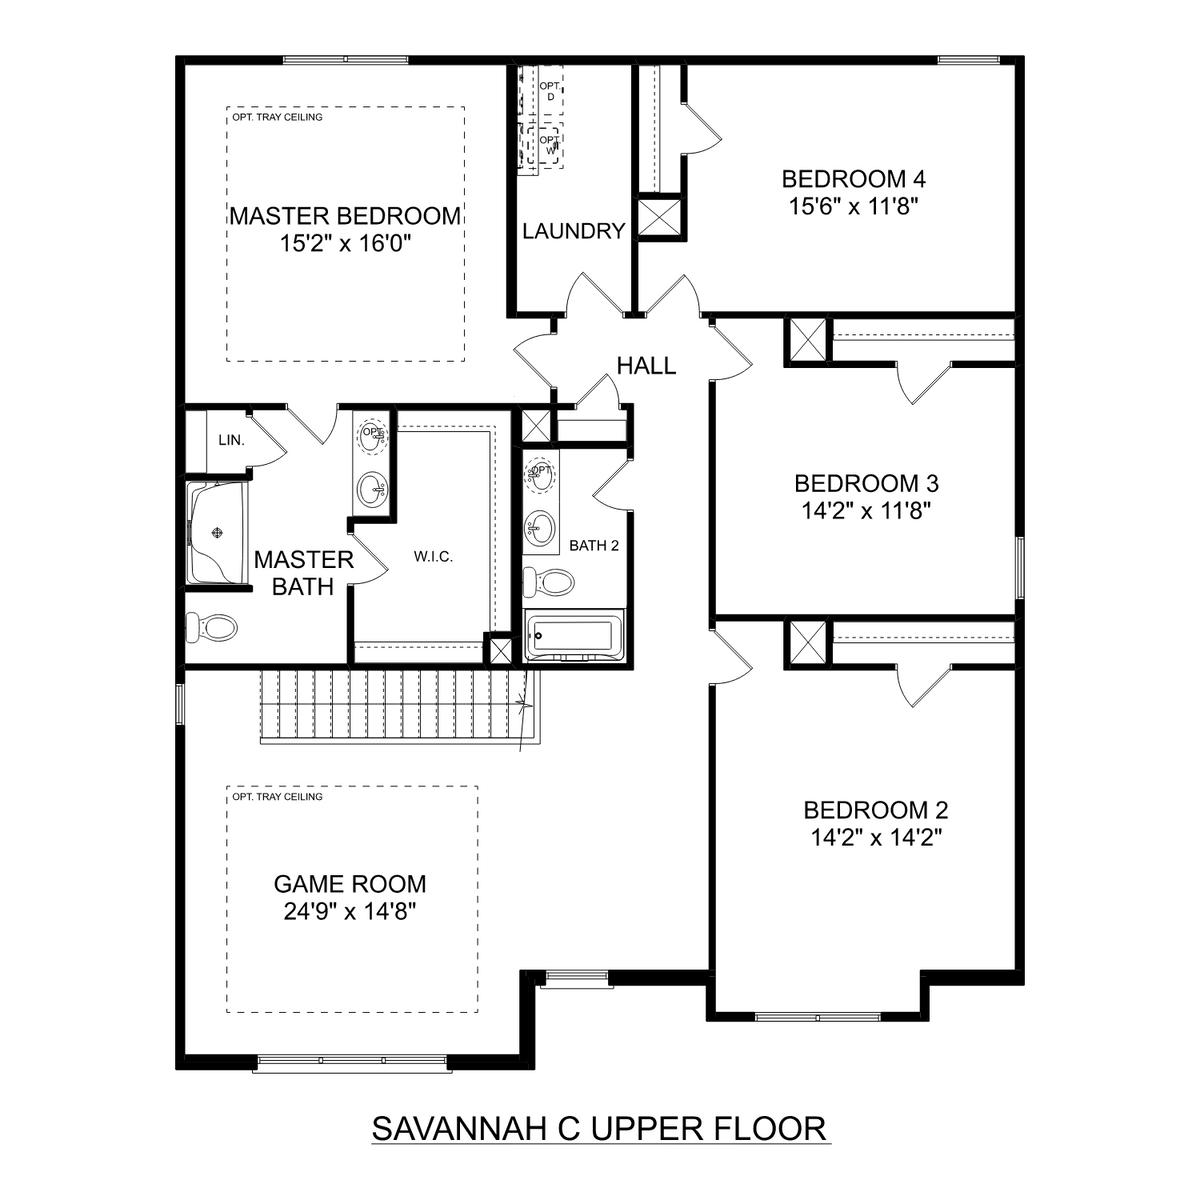 2 - The Savannah C floor plan layout for 157 Cherry Laurel Drive in Davidson Homes' Clearview community.